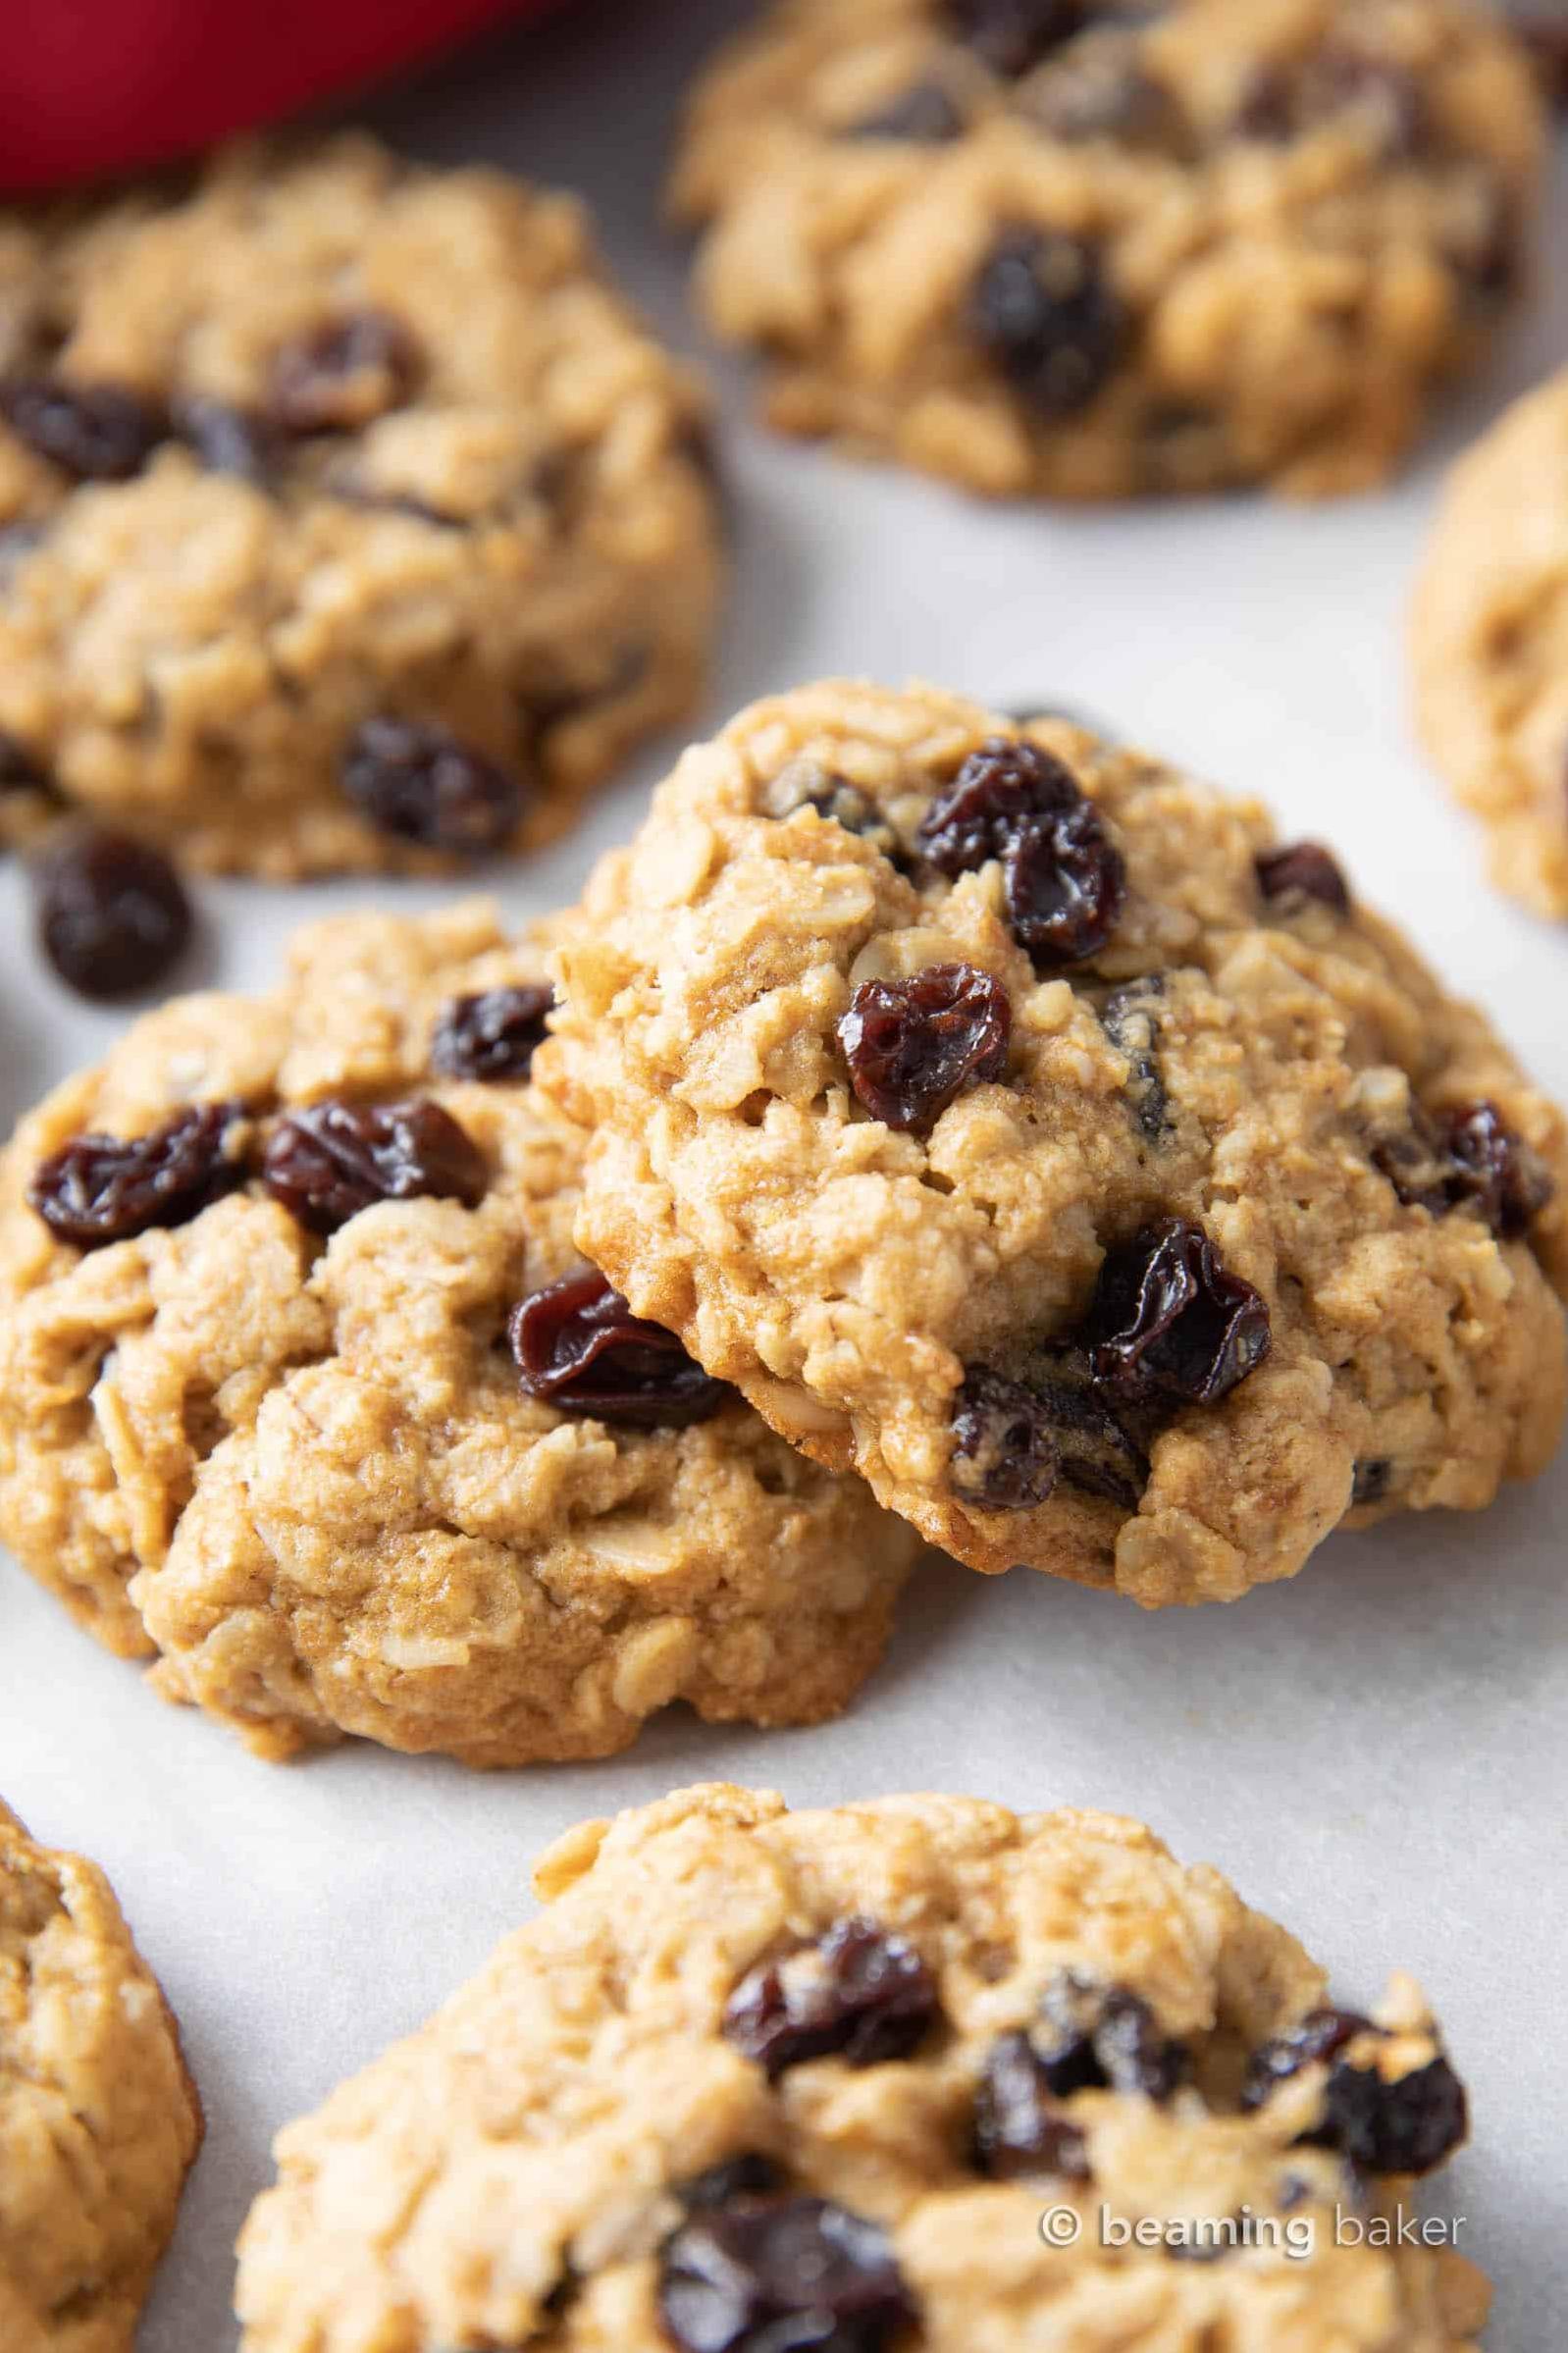  Who needs butter when you have coconut oil? These cookies are #dairyfree.